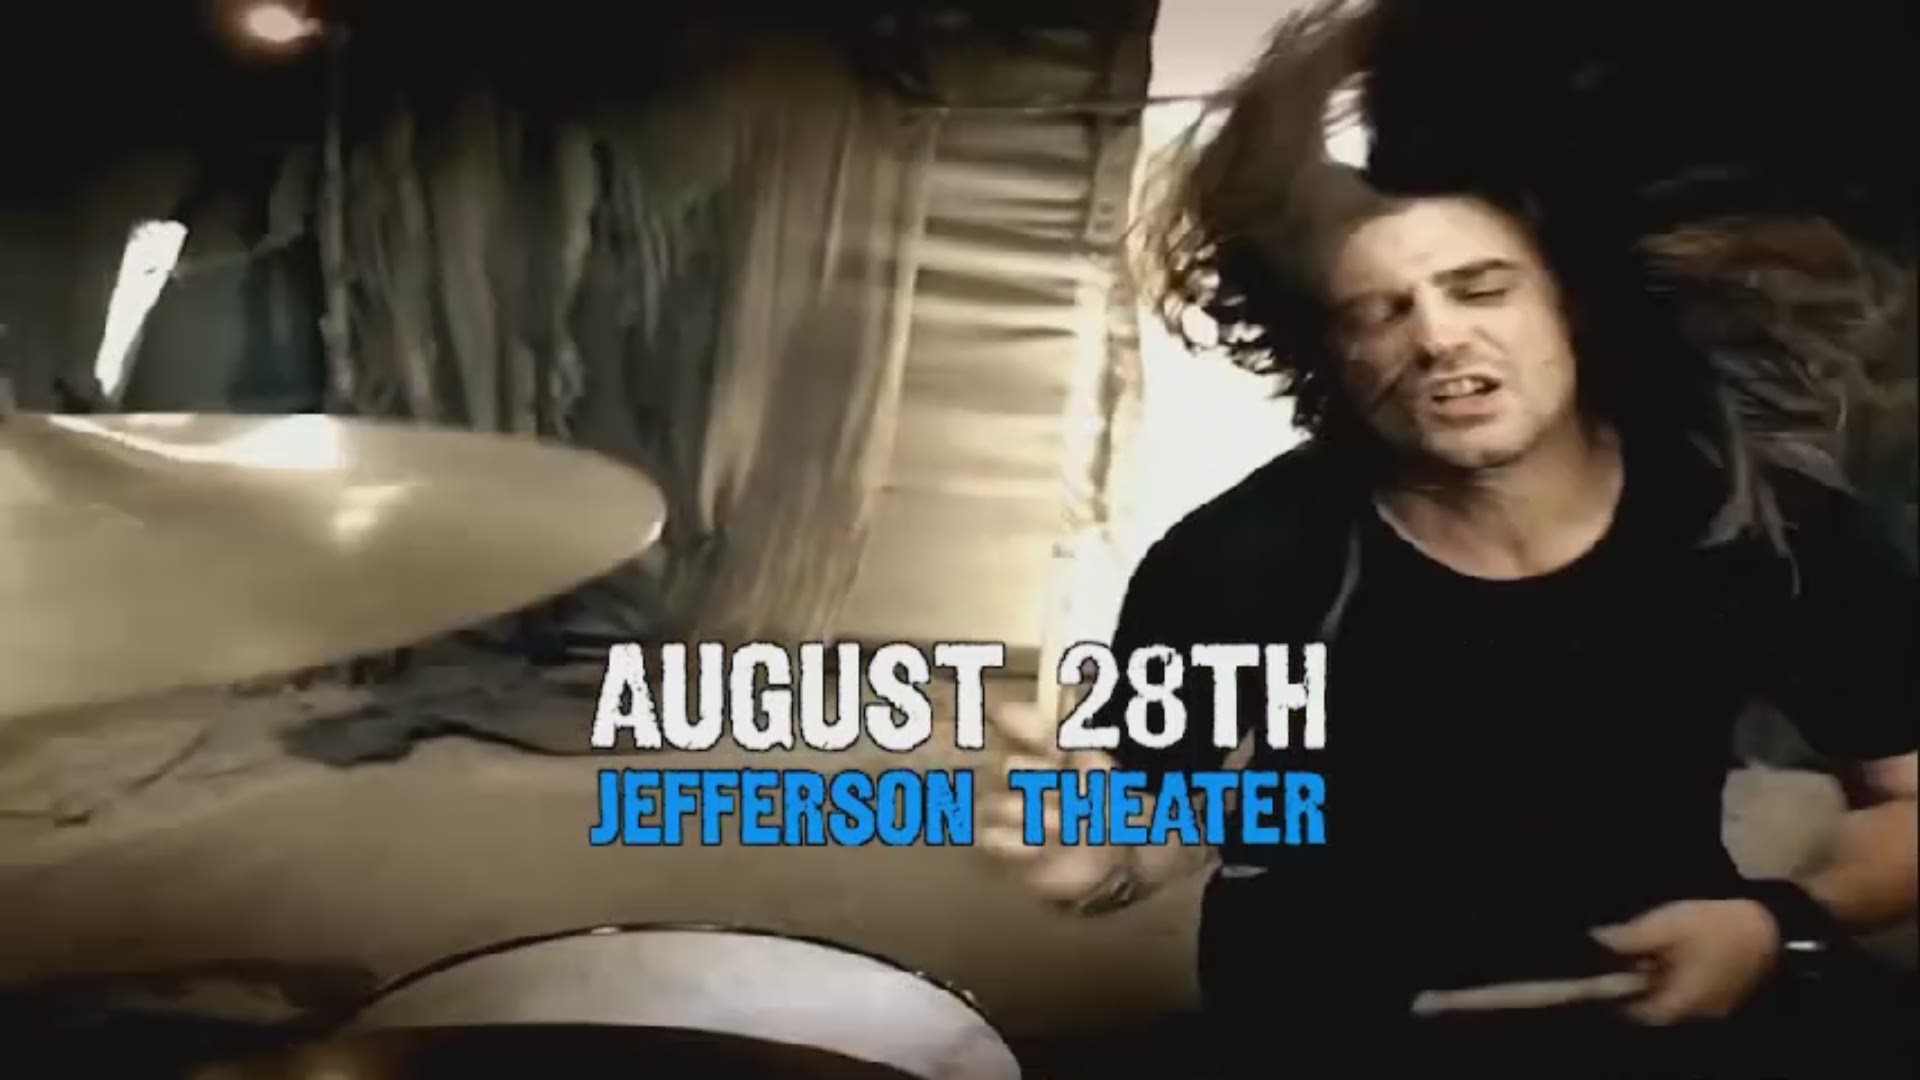 Win tickets for Muddfest at the Jefferson Theater in downtown Beaumont on August 28, 2019.